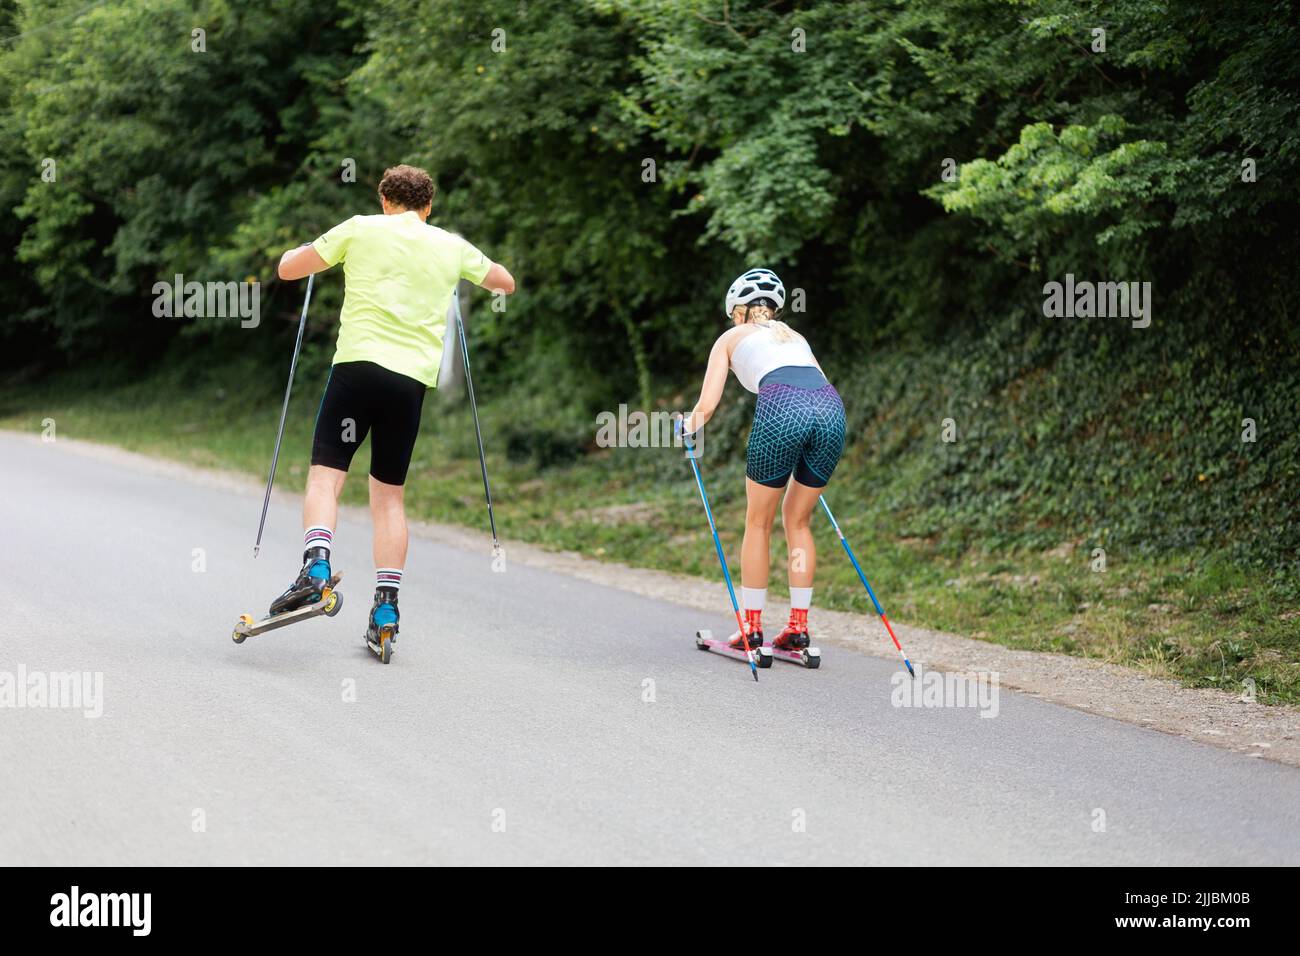 Athletic woman and man together training on the roller ski. Back view. Concept of competition, biathlon, and summer workout. Stock Photo